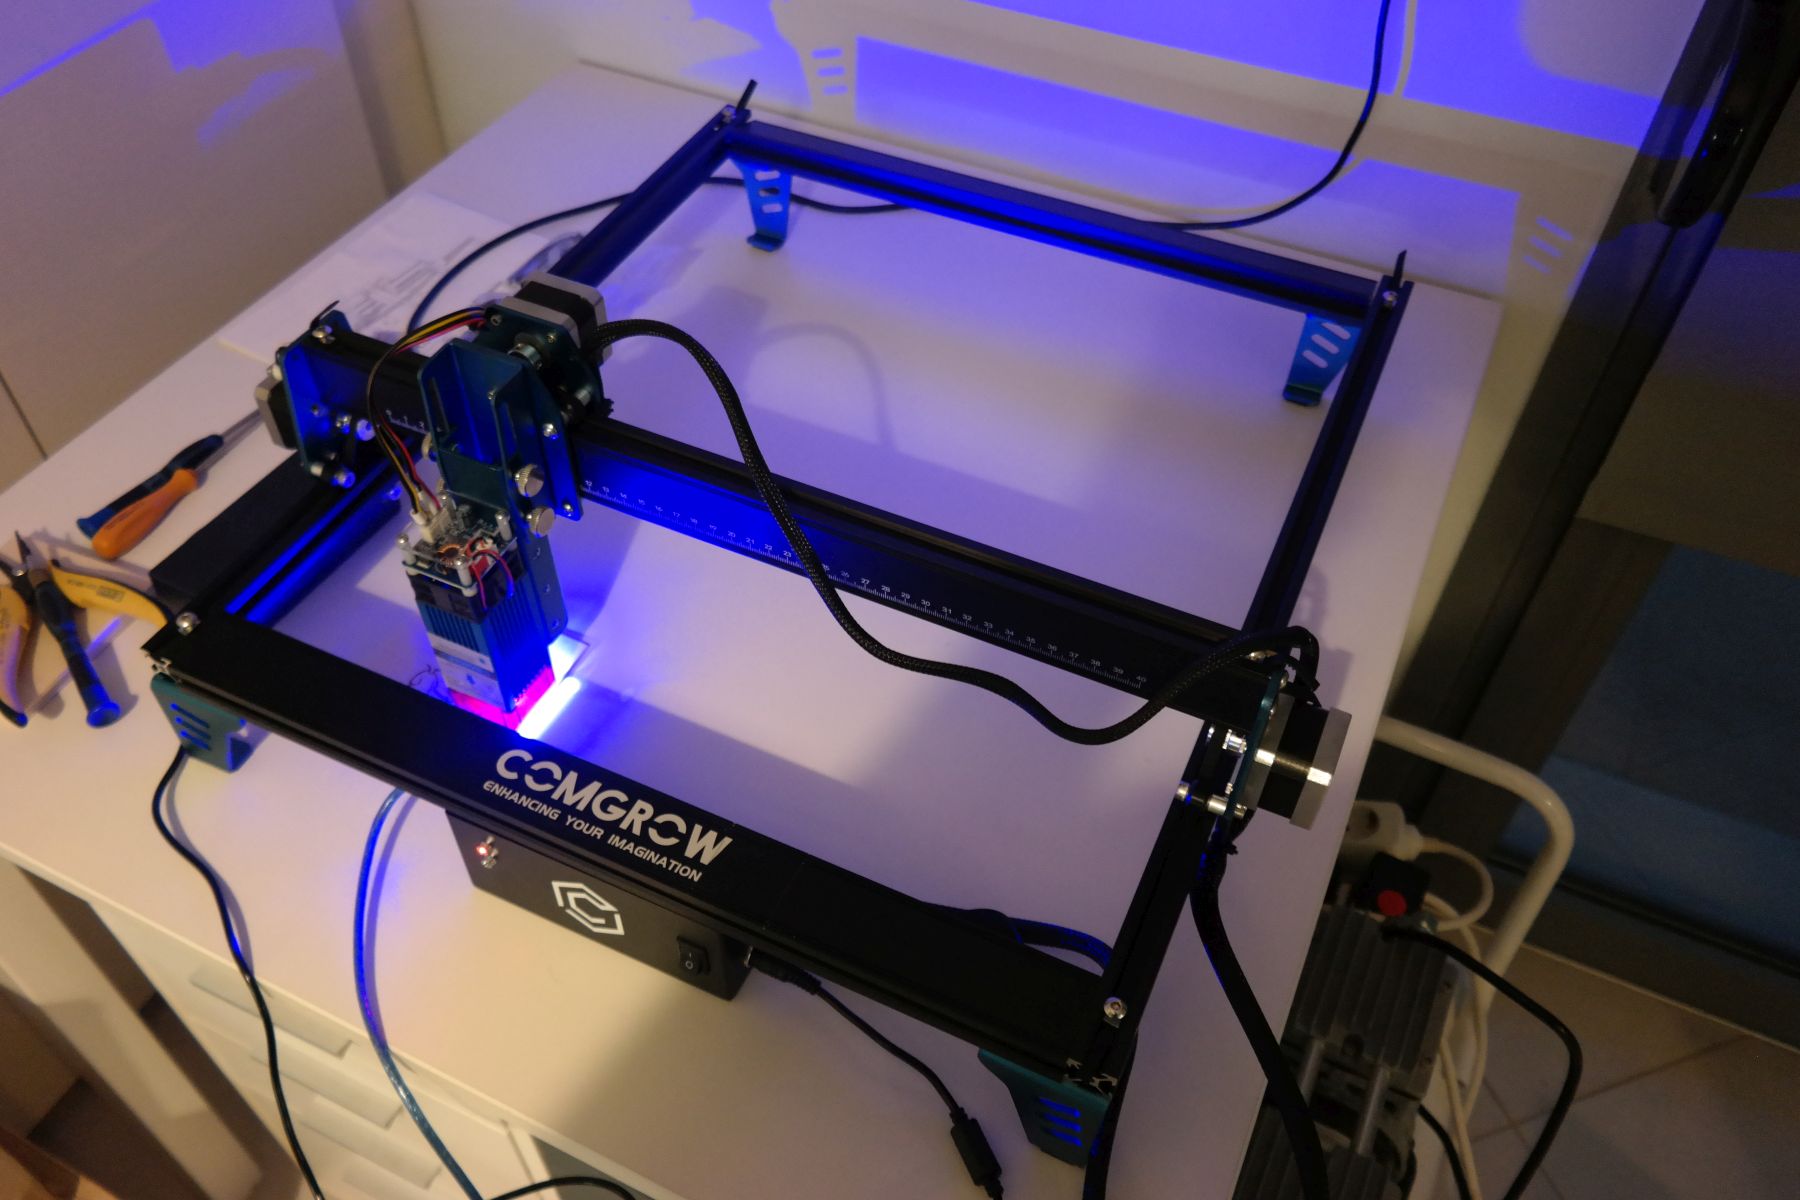 Atomstack A5 Simplifies Laser Engraving: Review of the 20-W Laser Engraver